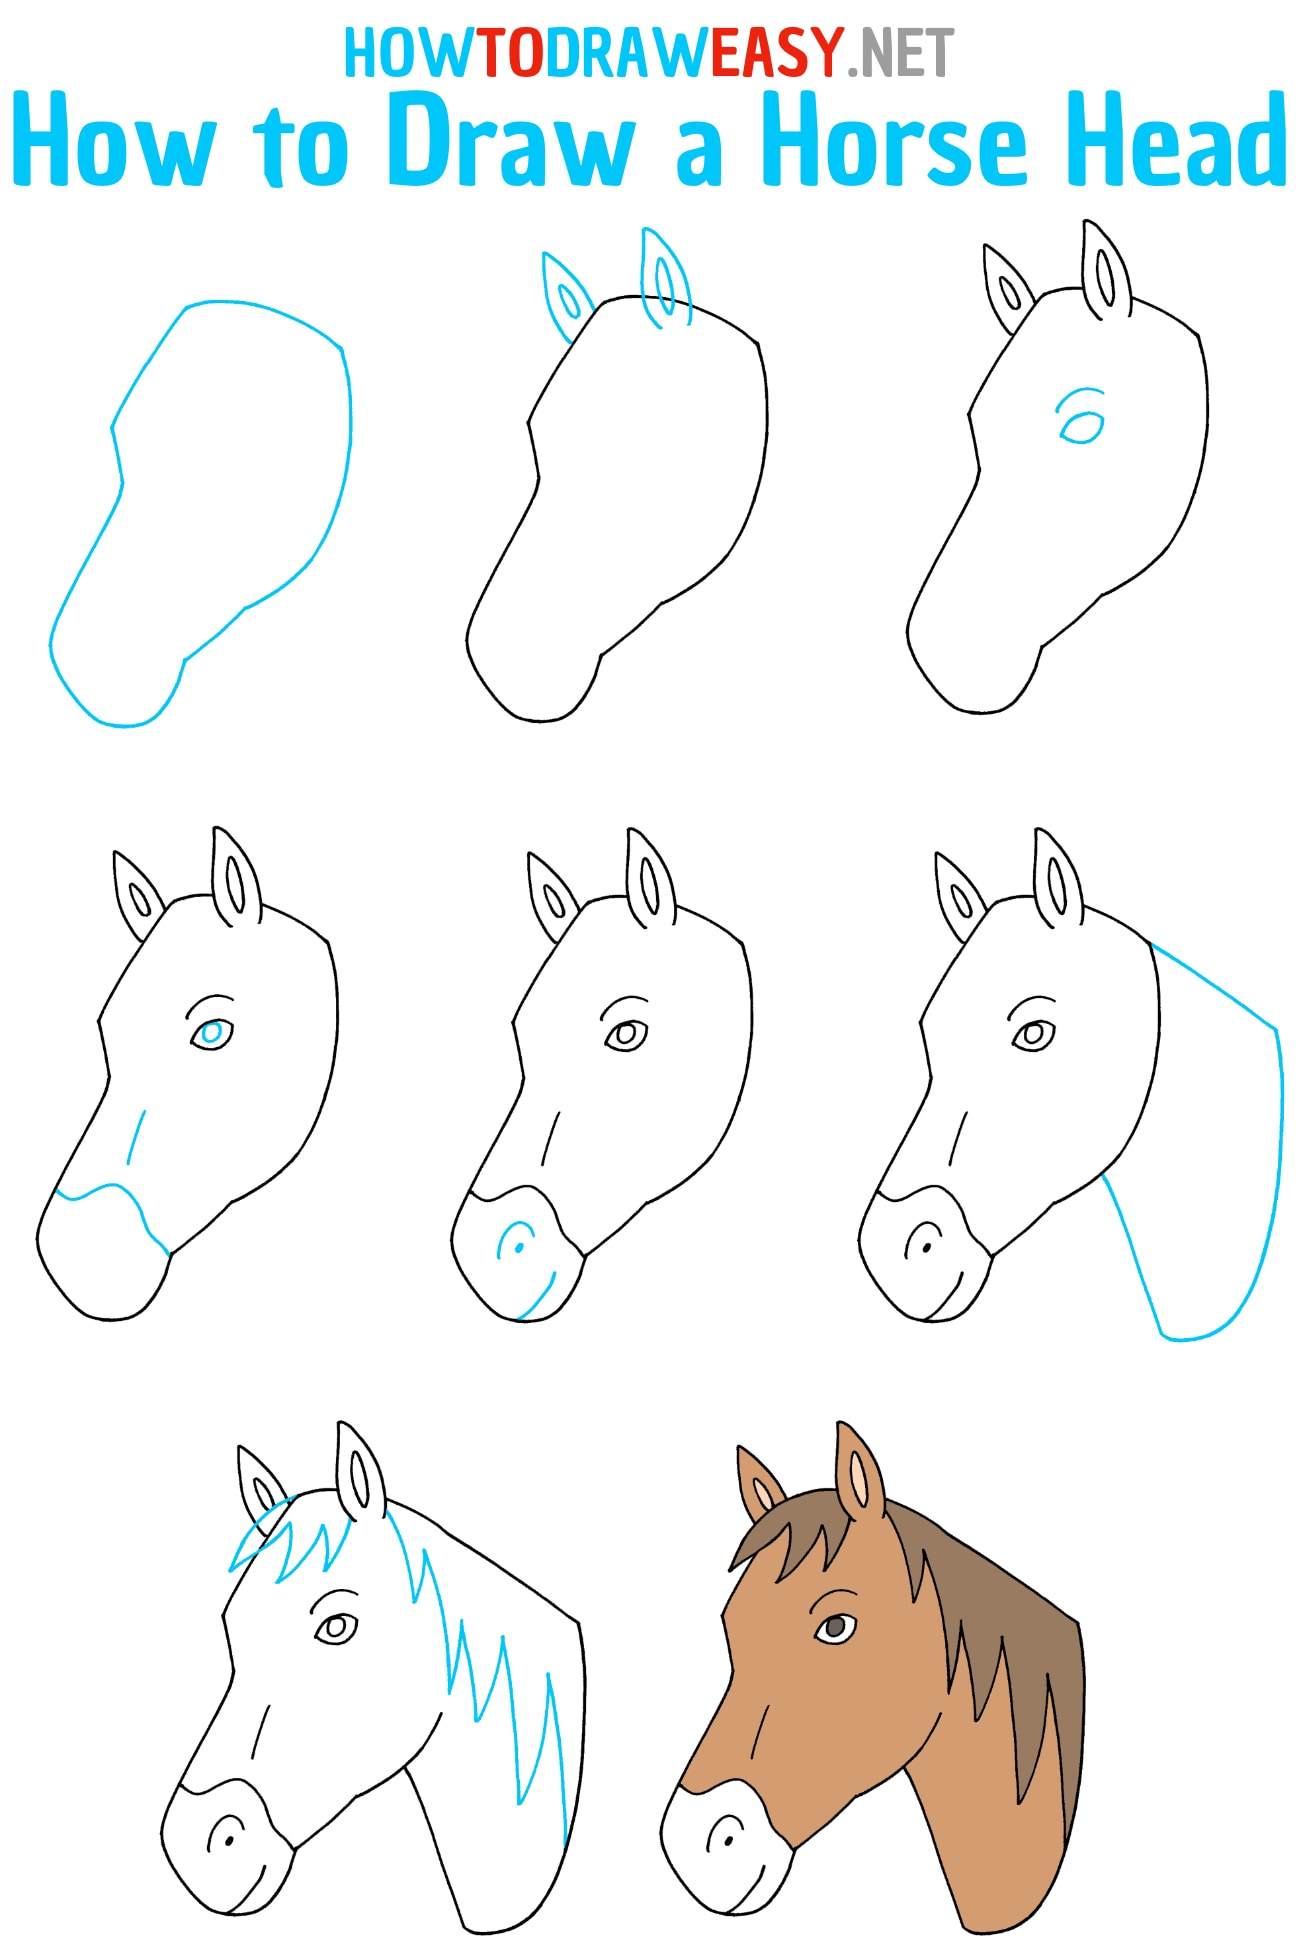 How to Draw a Horse Head Step by Step